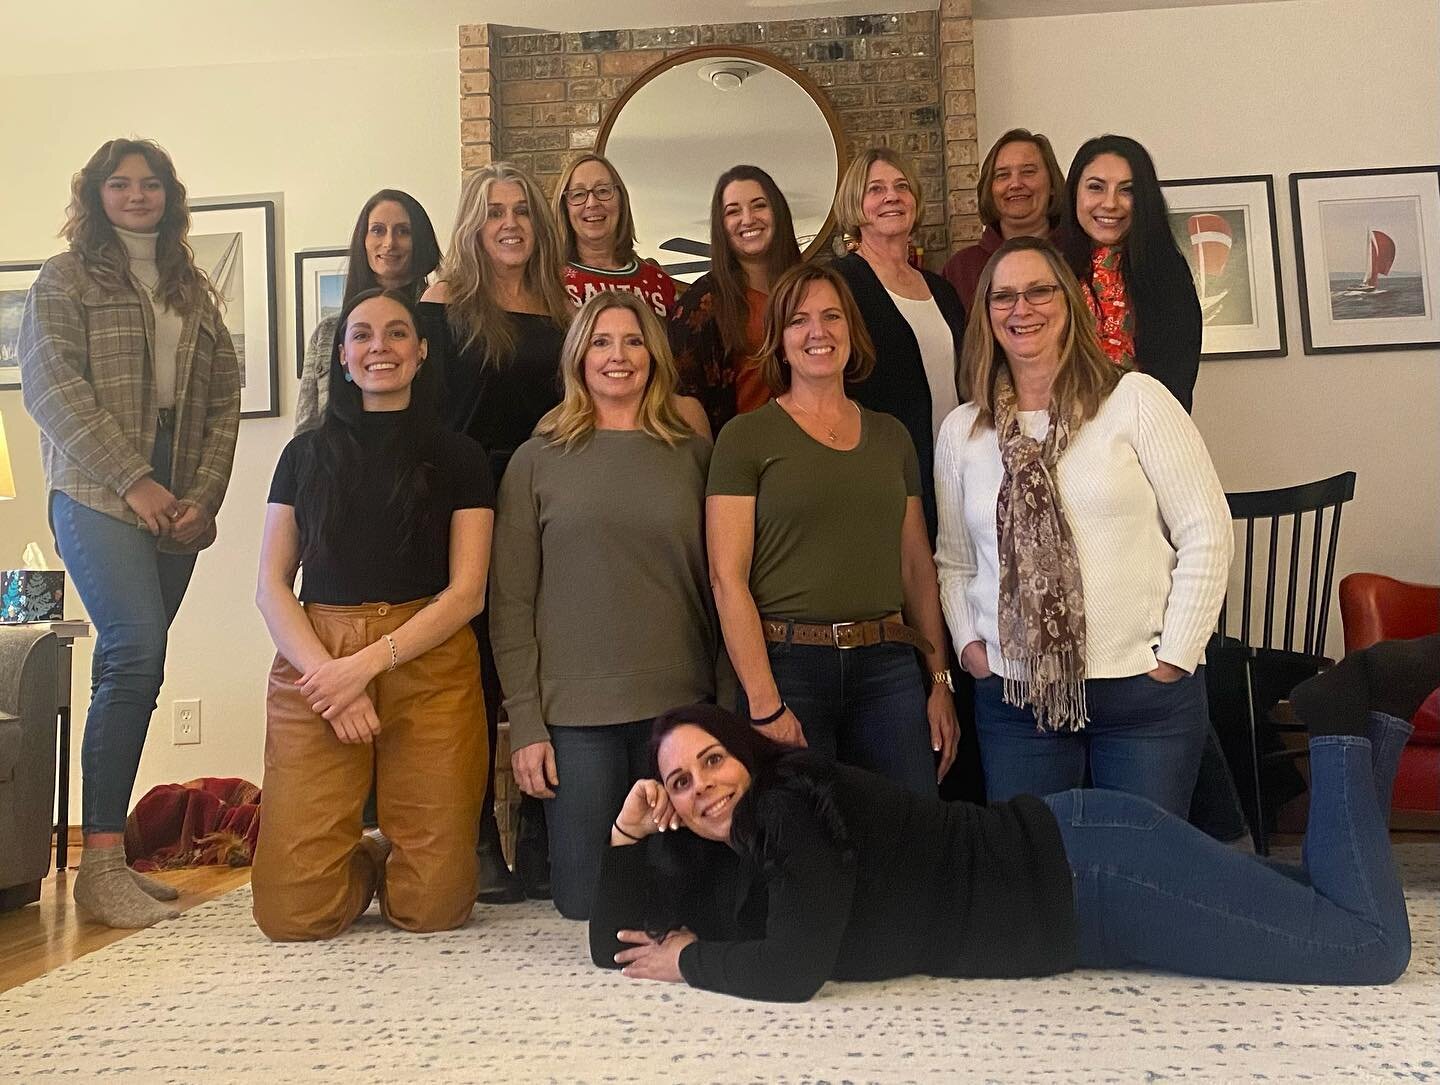 Shannon hosted another fabulous New Balance Training barn party today. So thankful for this group of wonderful group of ladies. ❤️